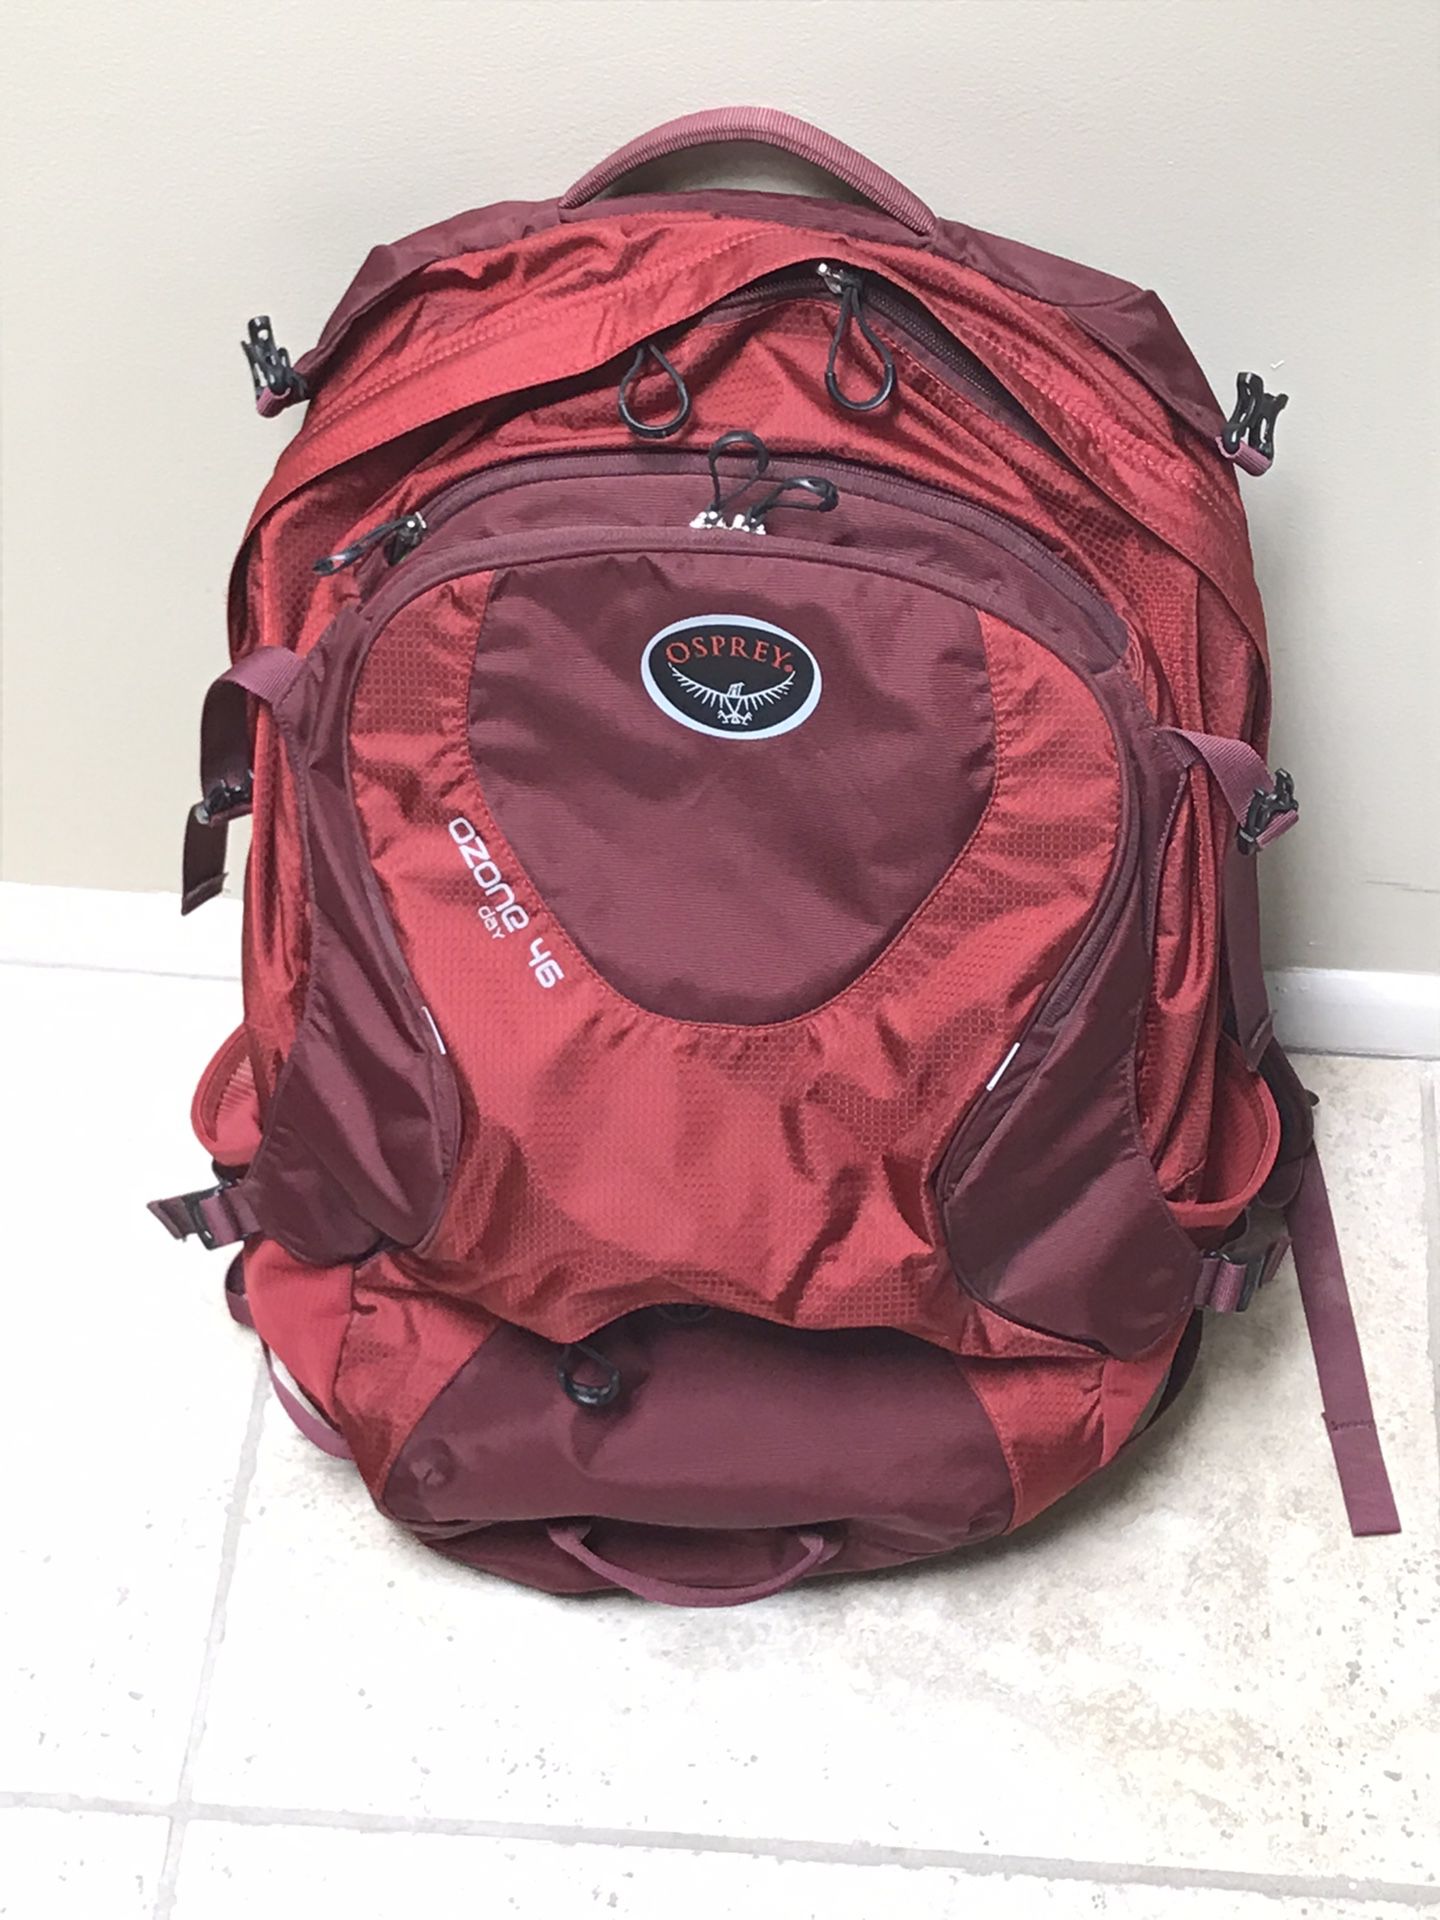 Osprey Ozone 46 backpack travel day pack hiking travel like new used once